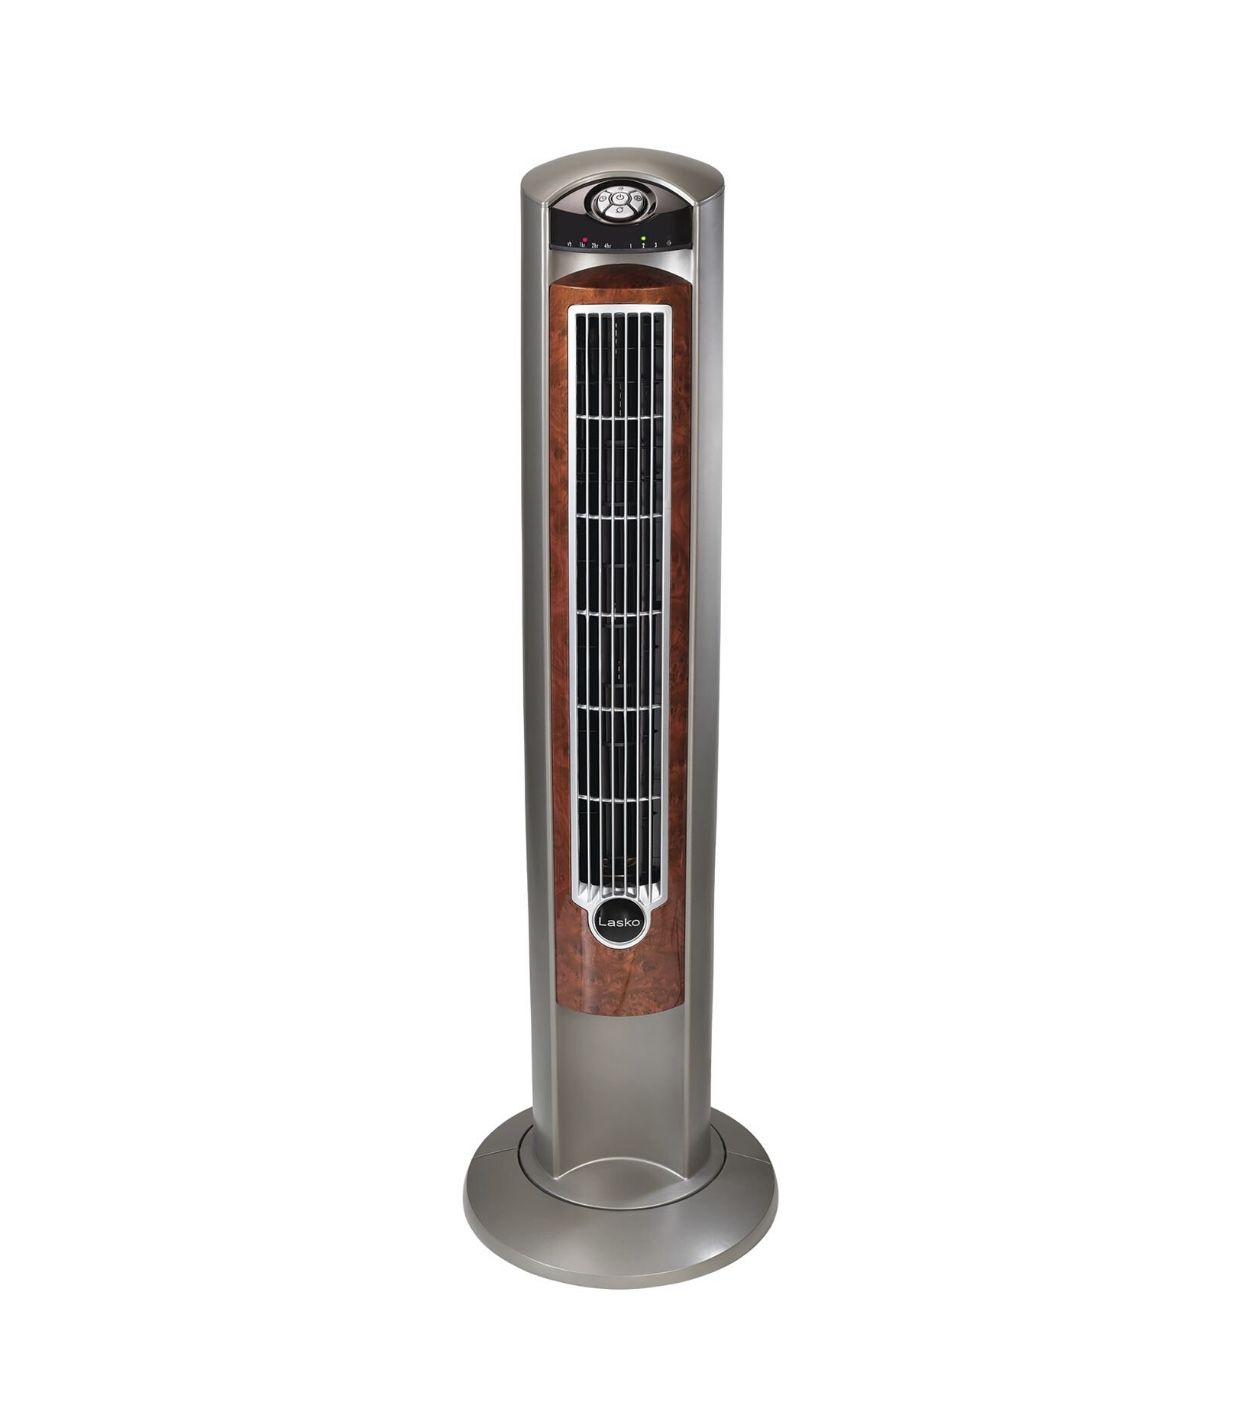 Lasko 42" Wind Curve 3-Speed Oscillating Tower Fan with Nighttime Setting and Remote Control, Model T42954, Gray/Woodgrain